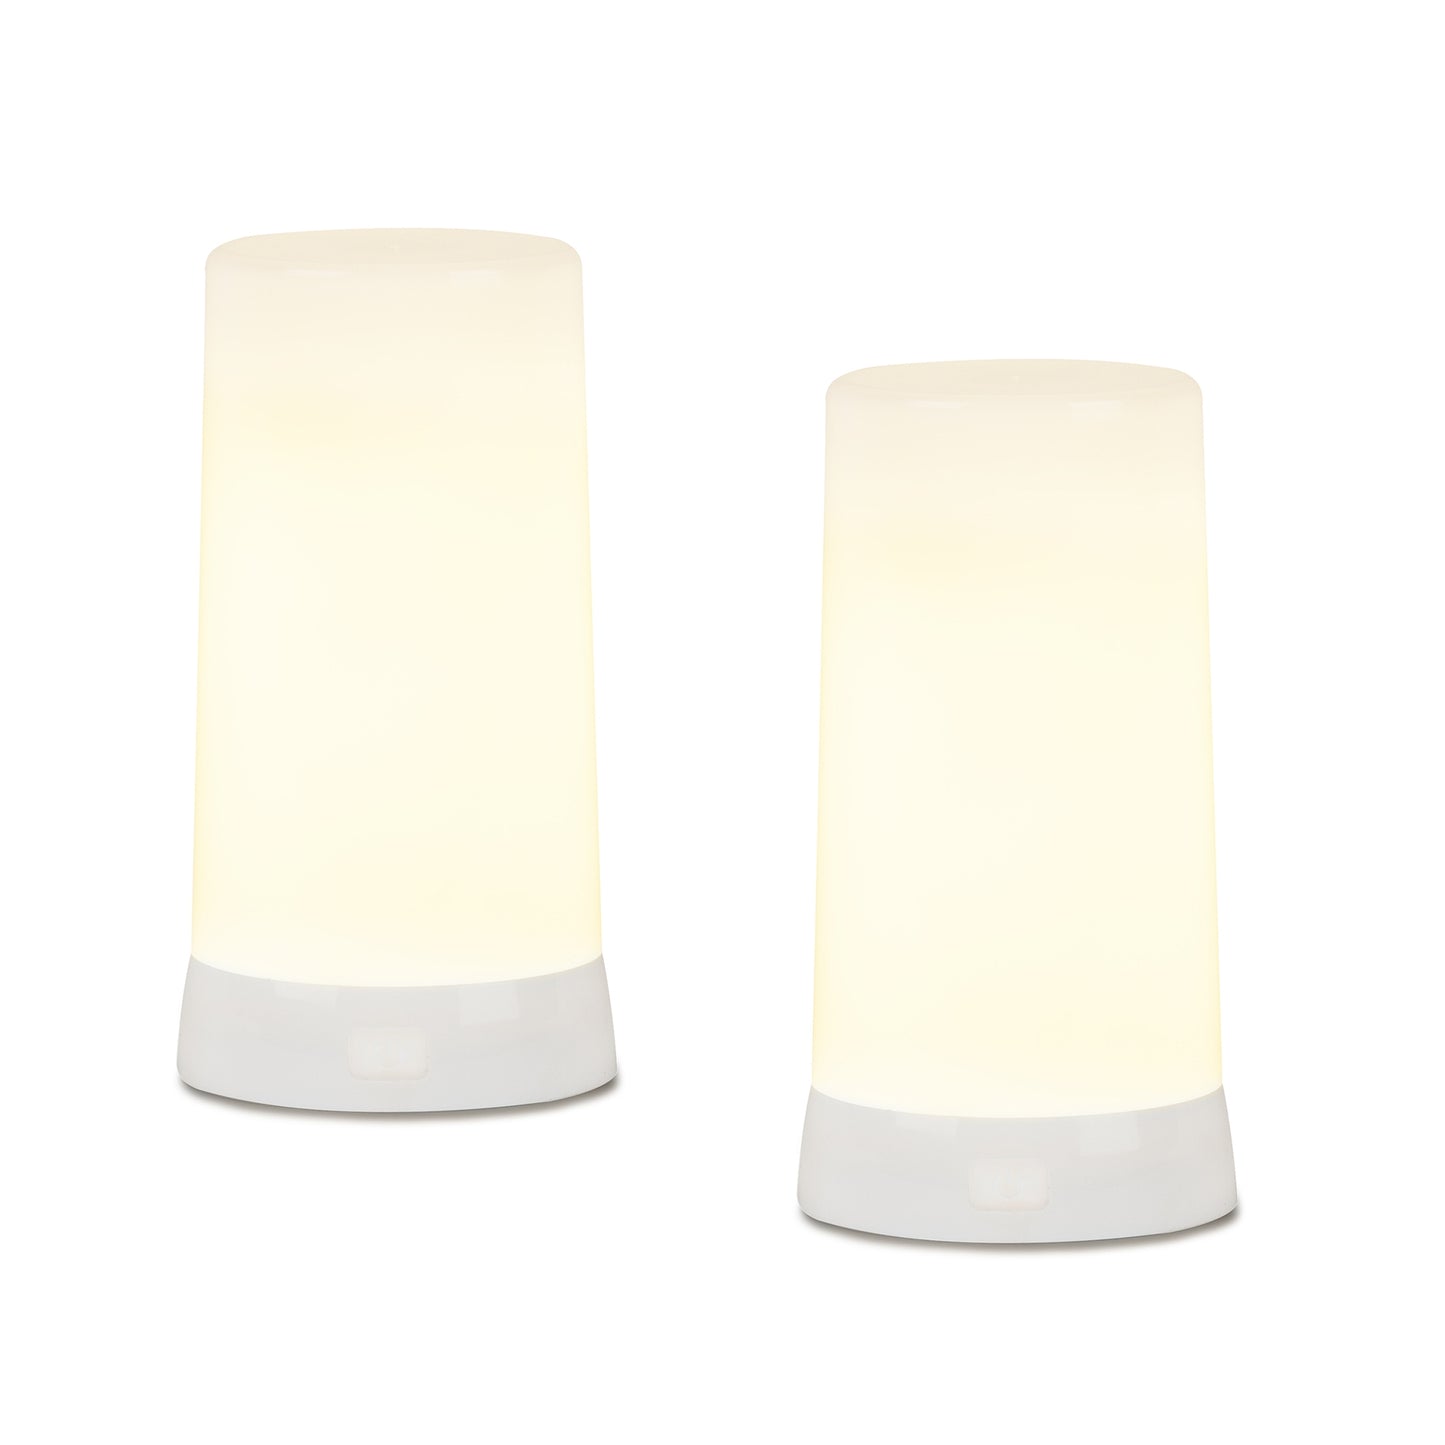 LED Flickering Light Designer Candle with Remote and Magnet (Set of 2)